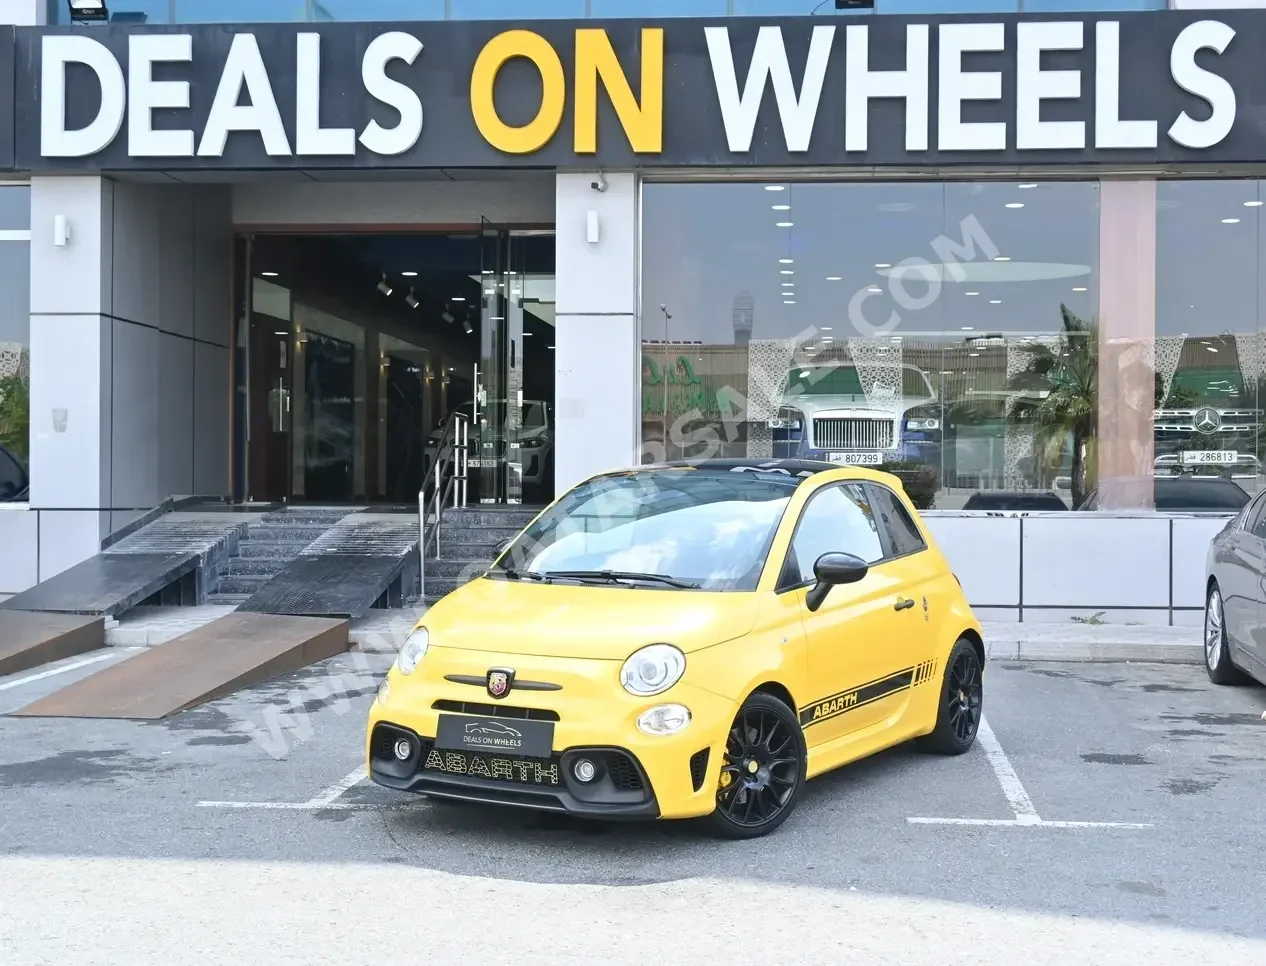 Fiat  595  Abarth Competizione  2020  Automatic  37,000 Km  4 Cylinder  All Wheel Drive (AWD)  Coupe / Sport  Yellow  With Warranty